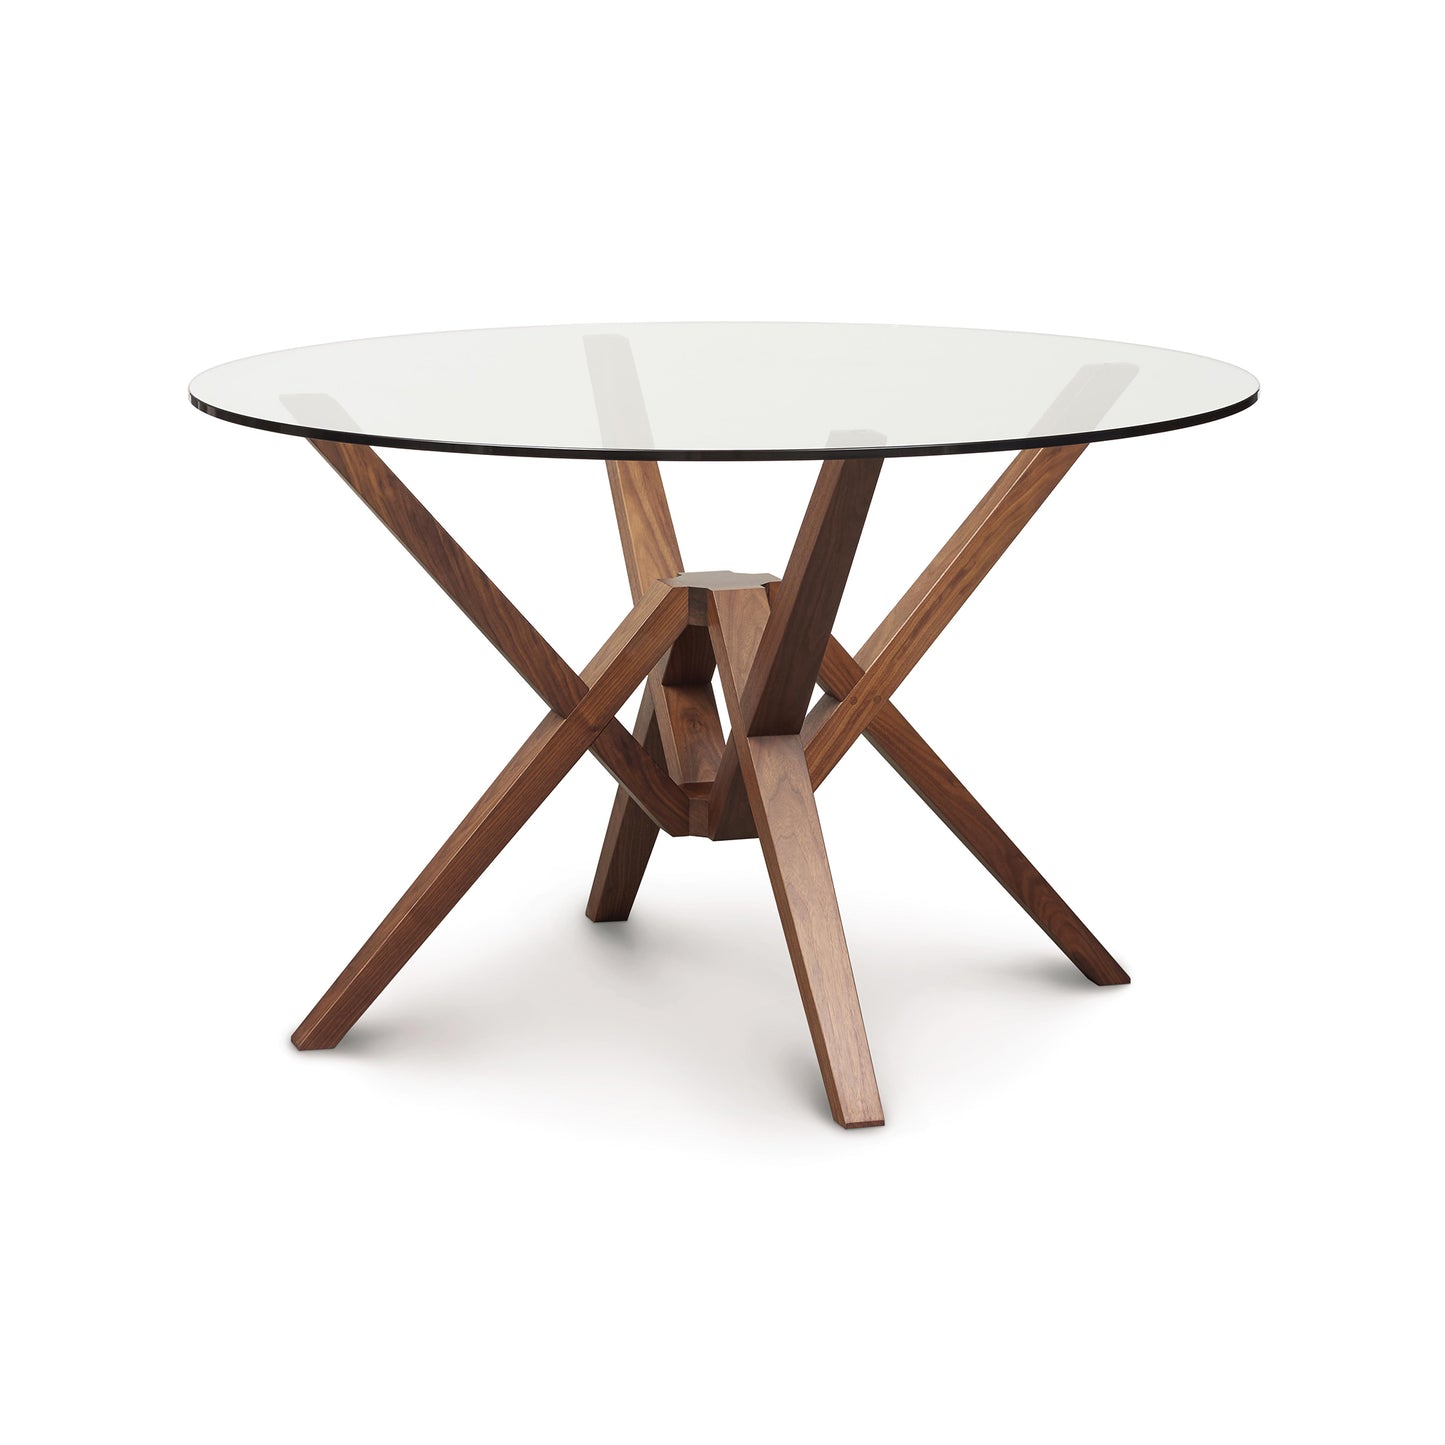 A modern Copeland Furniture Exeter Round Glass Top Table with a wooden cross base design crafted from sustainable harvested hardwoods, isolated on a white background.